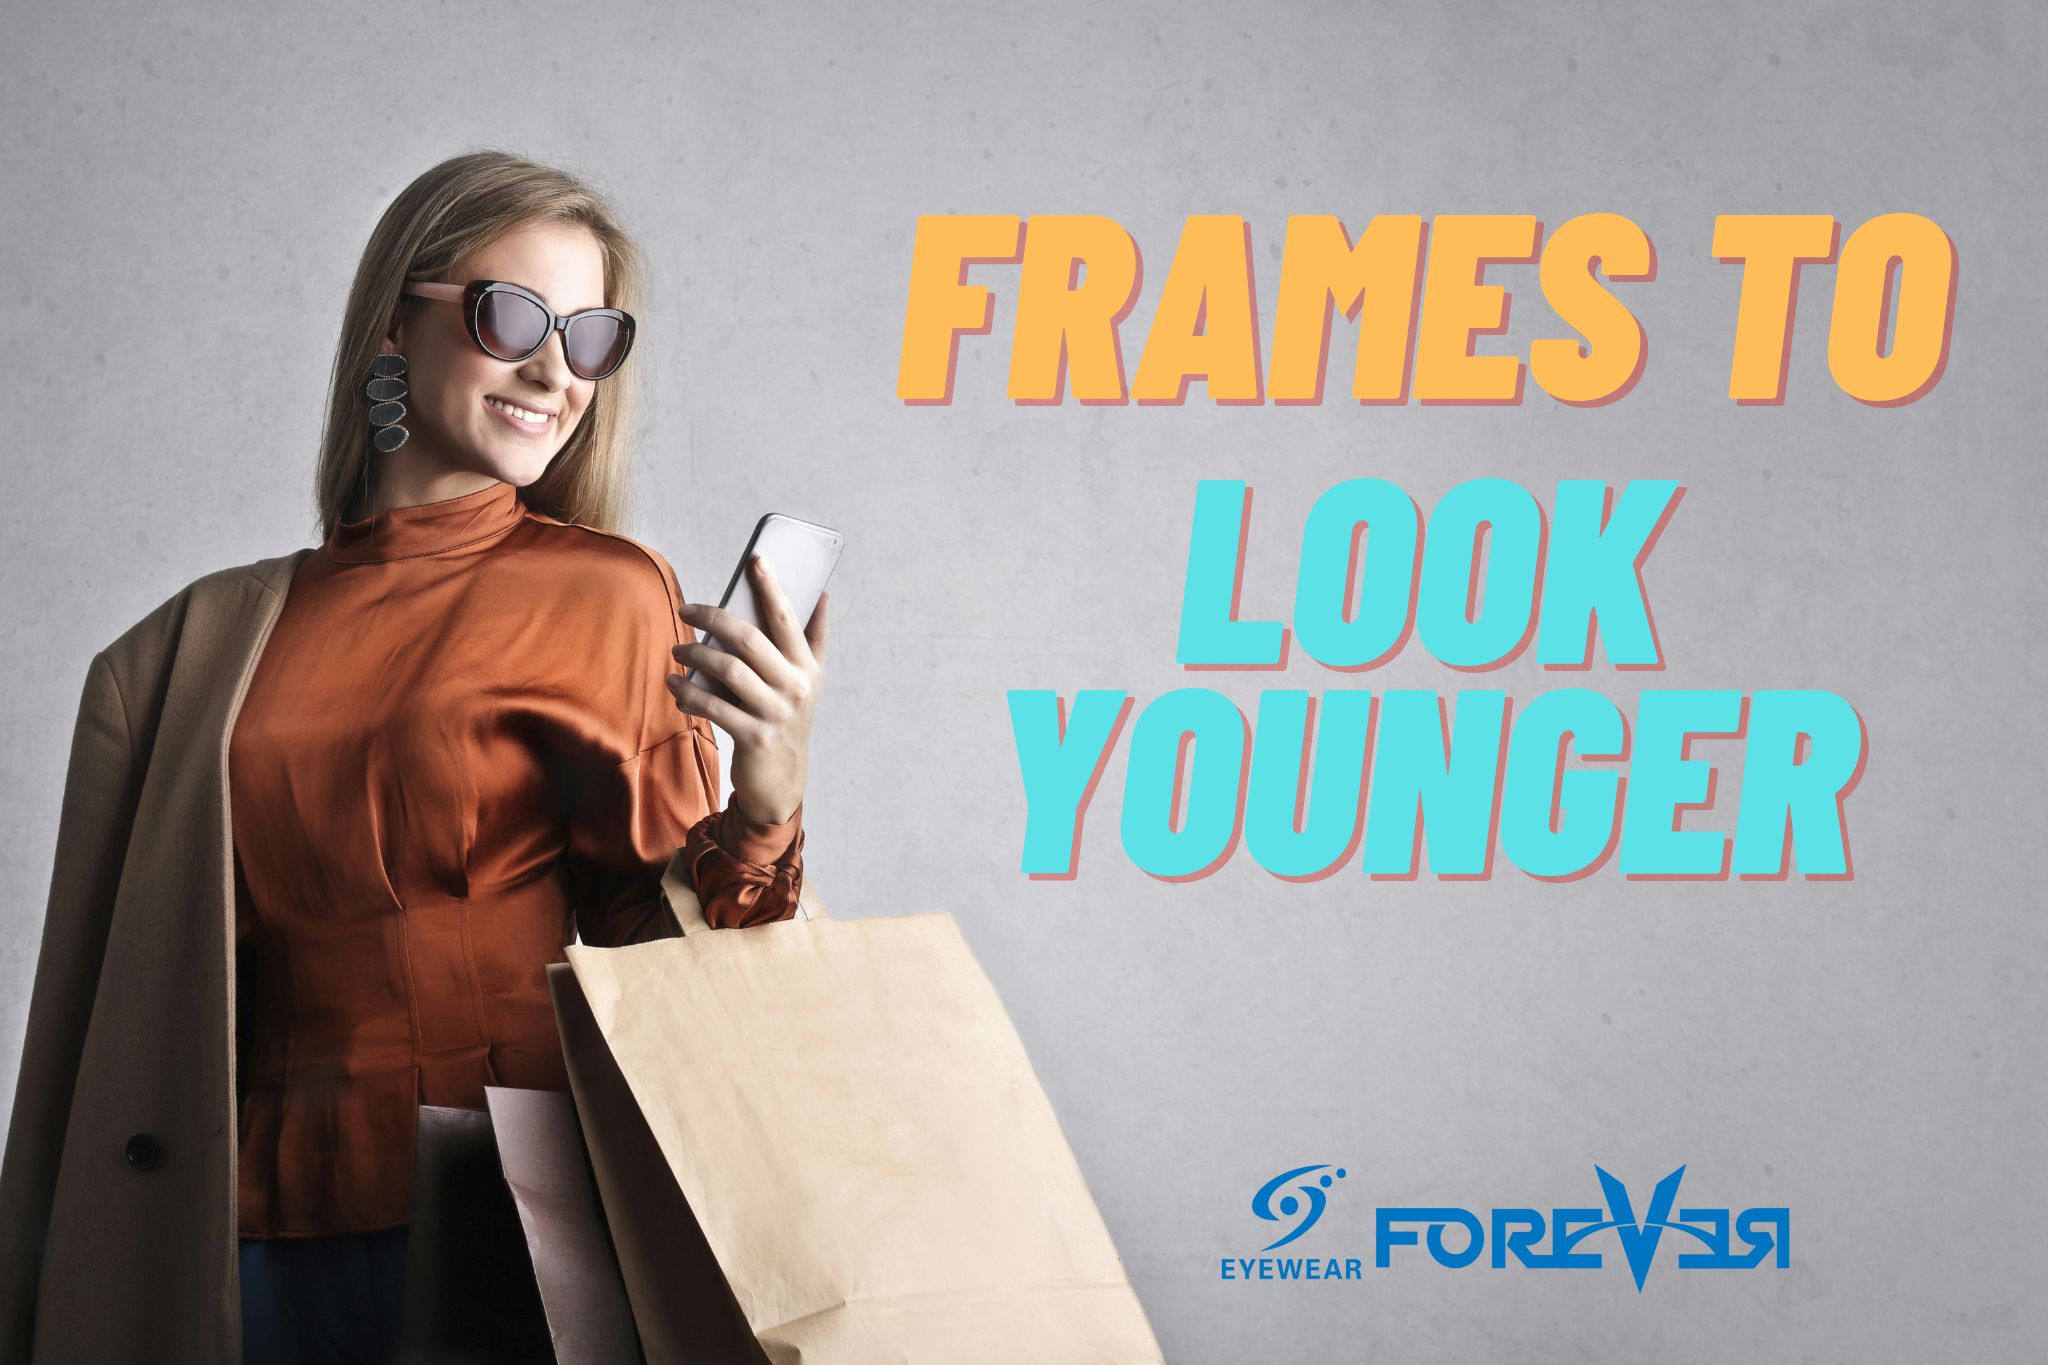 Frames to Look Younger